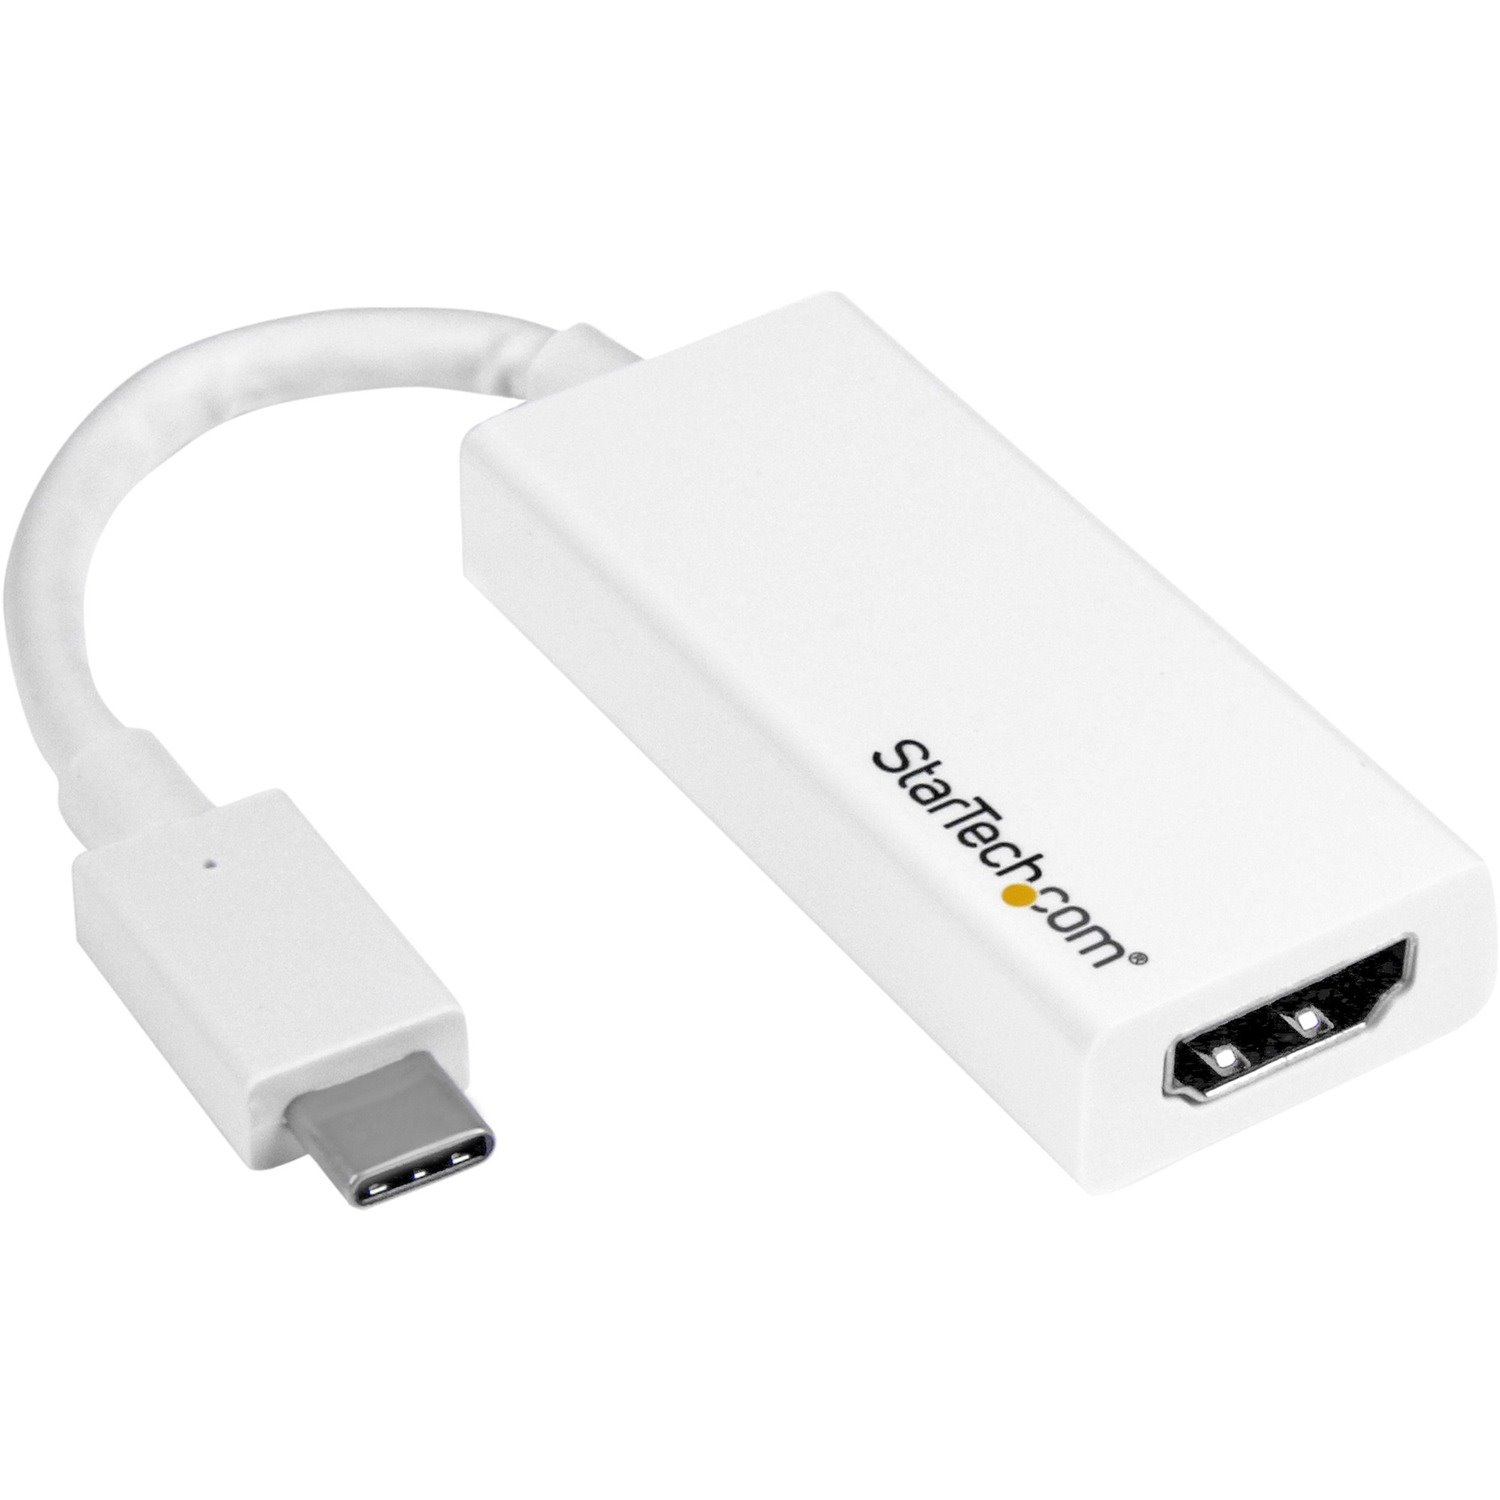 StarTech.com USB-C to HDMI Adapter - White - 4K 60Hz - Thunderbolt 3 Compatible - USB-C Adapter - USB Type C to HDMI Dongle Converter